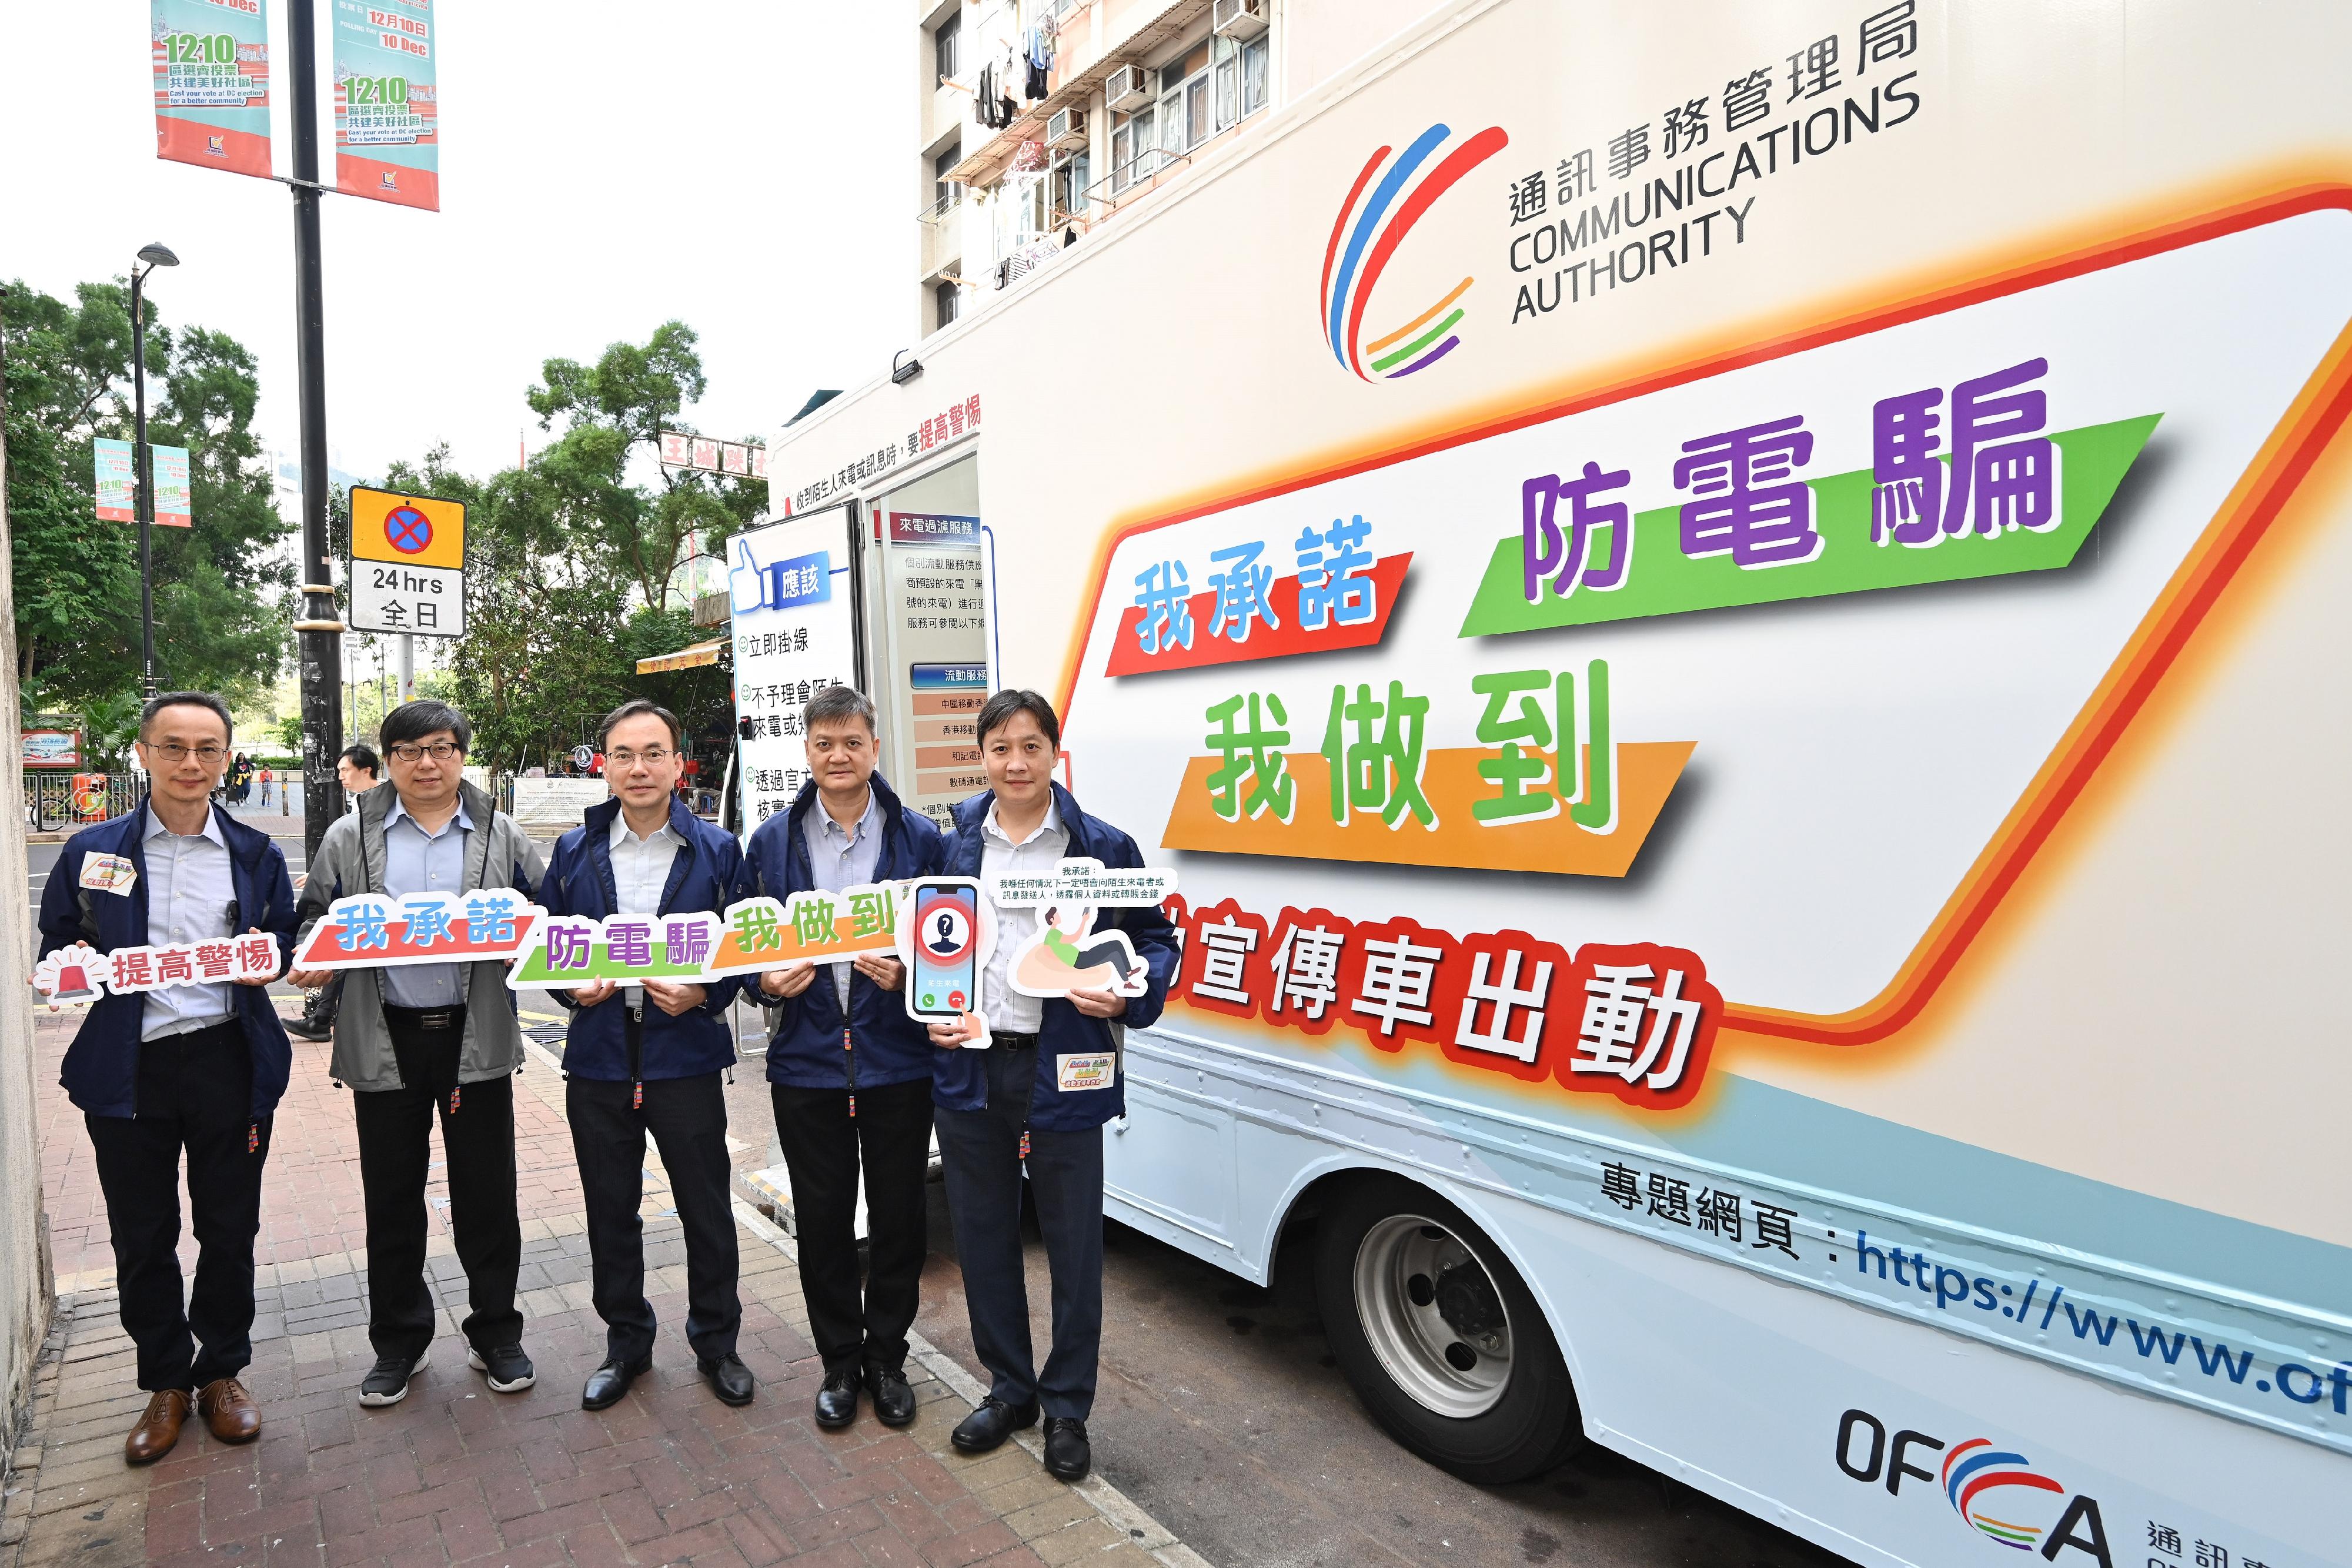 The Communications Authority today (December 11) launched a promotion truck tour campaign themed "My Promise against Phone Scams" to enhance publicity against telephone scams. Photo shows the Director-General of Communications, Mr Chaucer Leung (centre), with personnel of the Office of the Communications Authority.